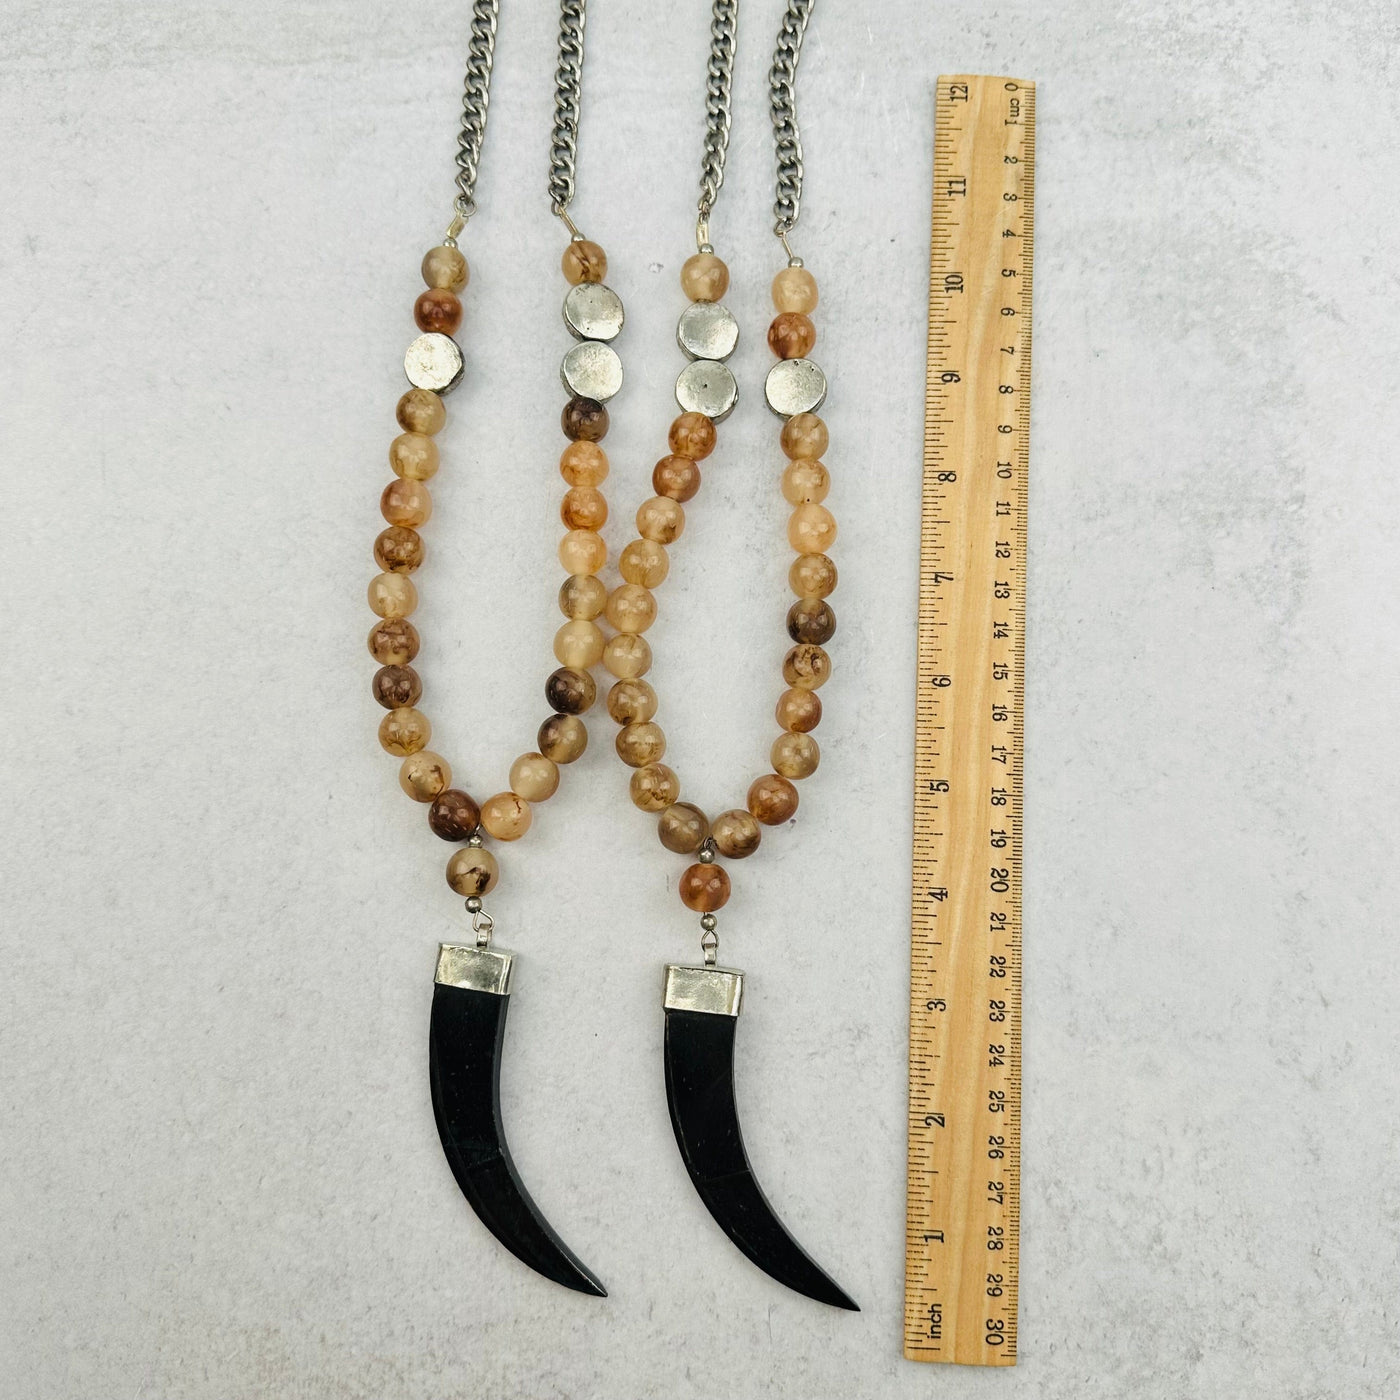 bottom portion of the necklace next to a ruler for size reference 